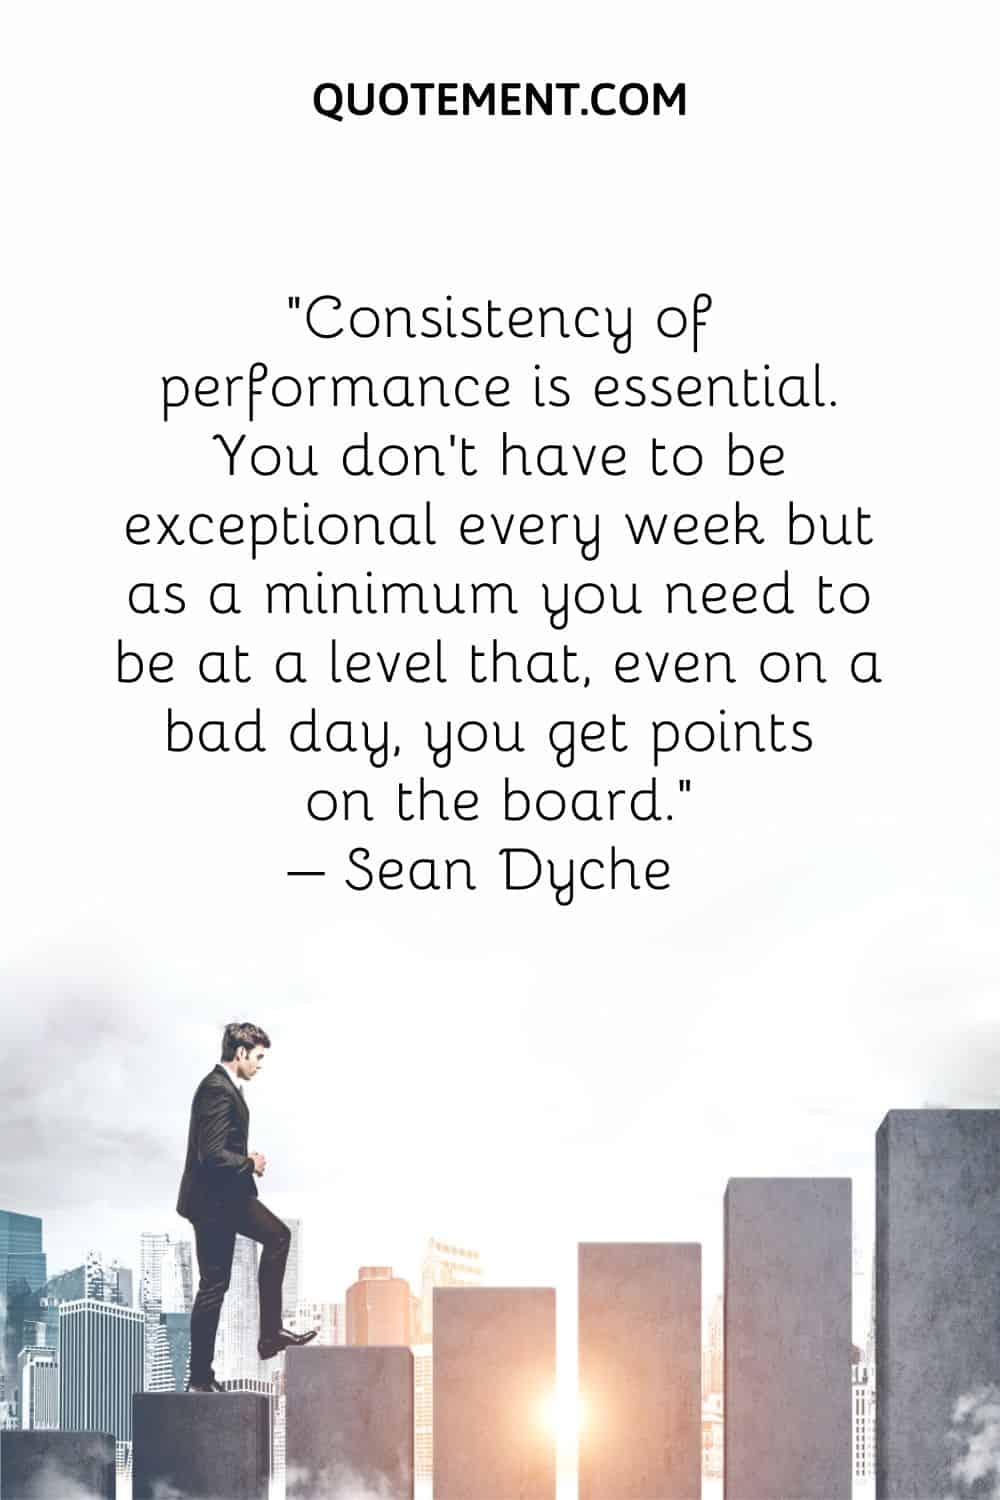 Consistency of performance is essential